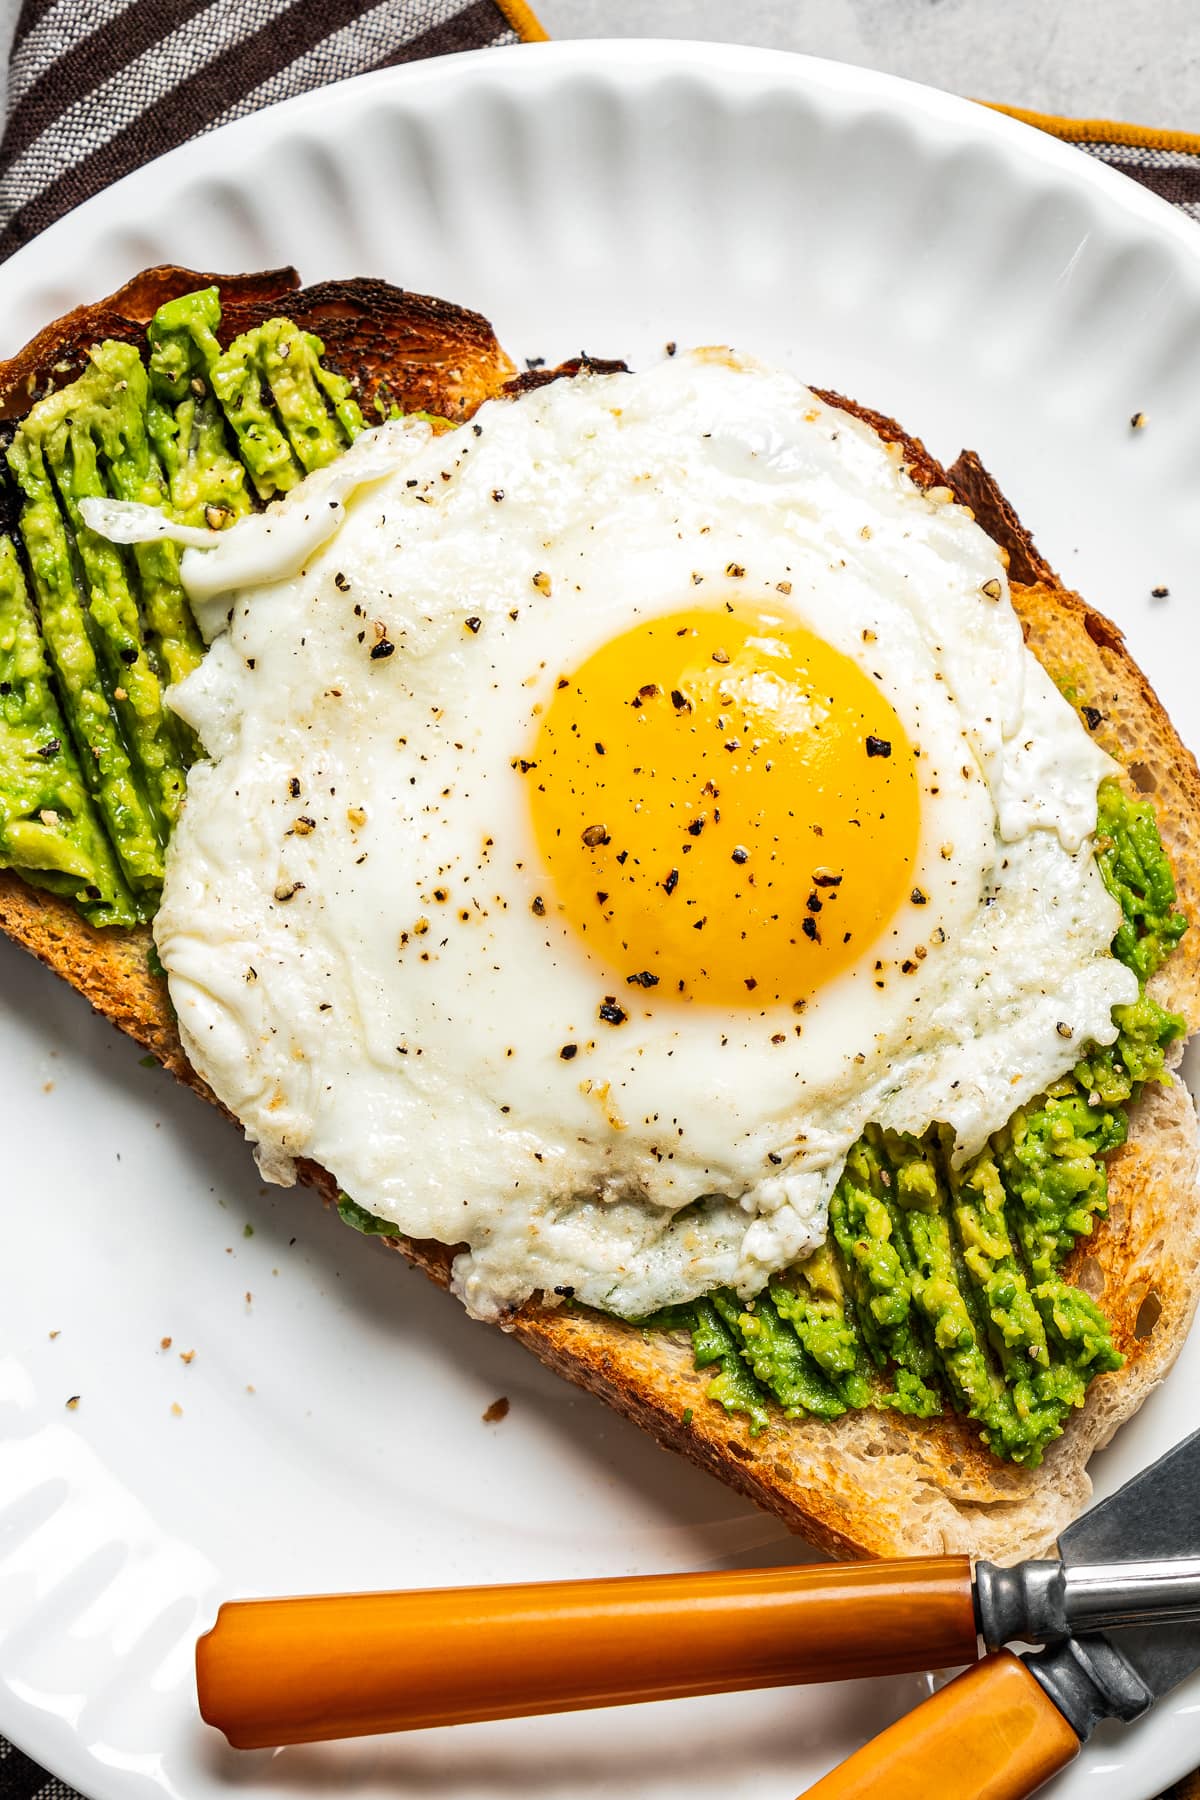 Close-up image of Avocado toast with an egg on top and served on a plate.